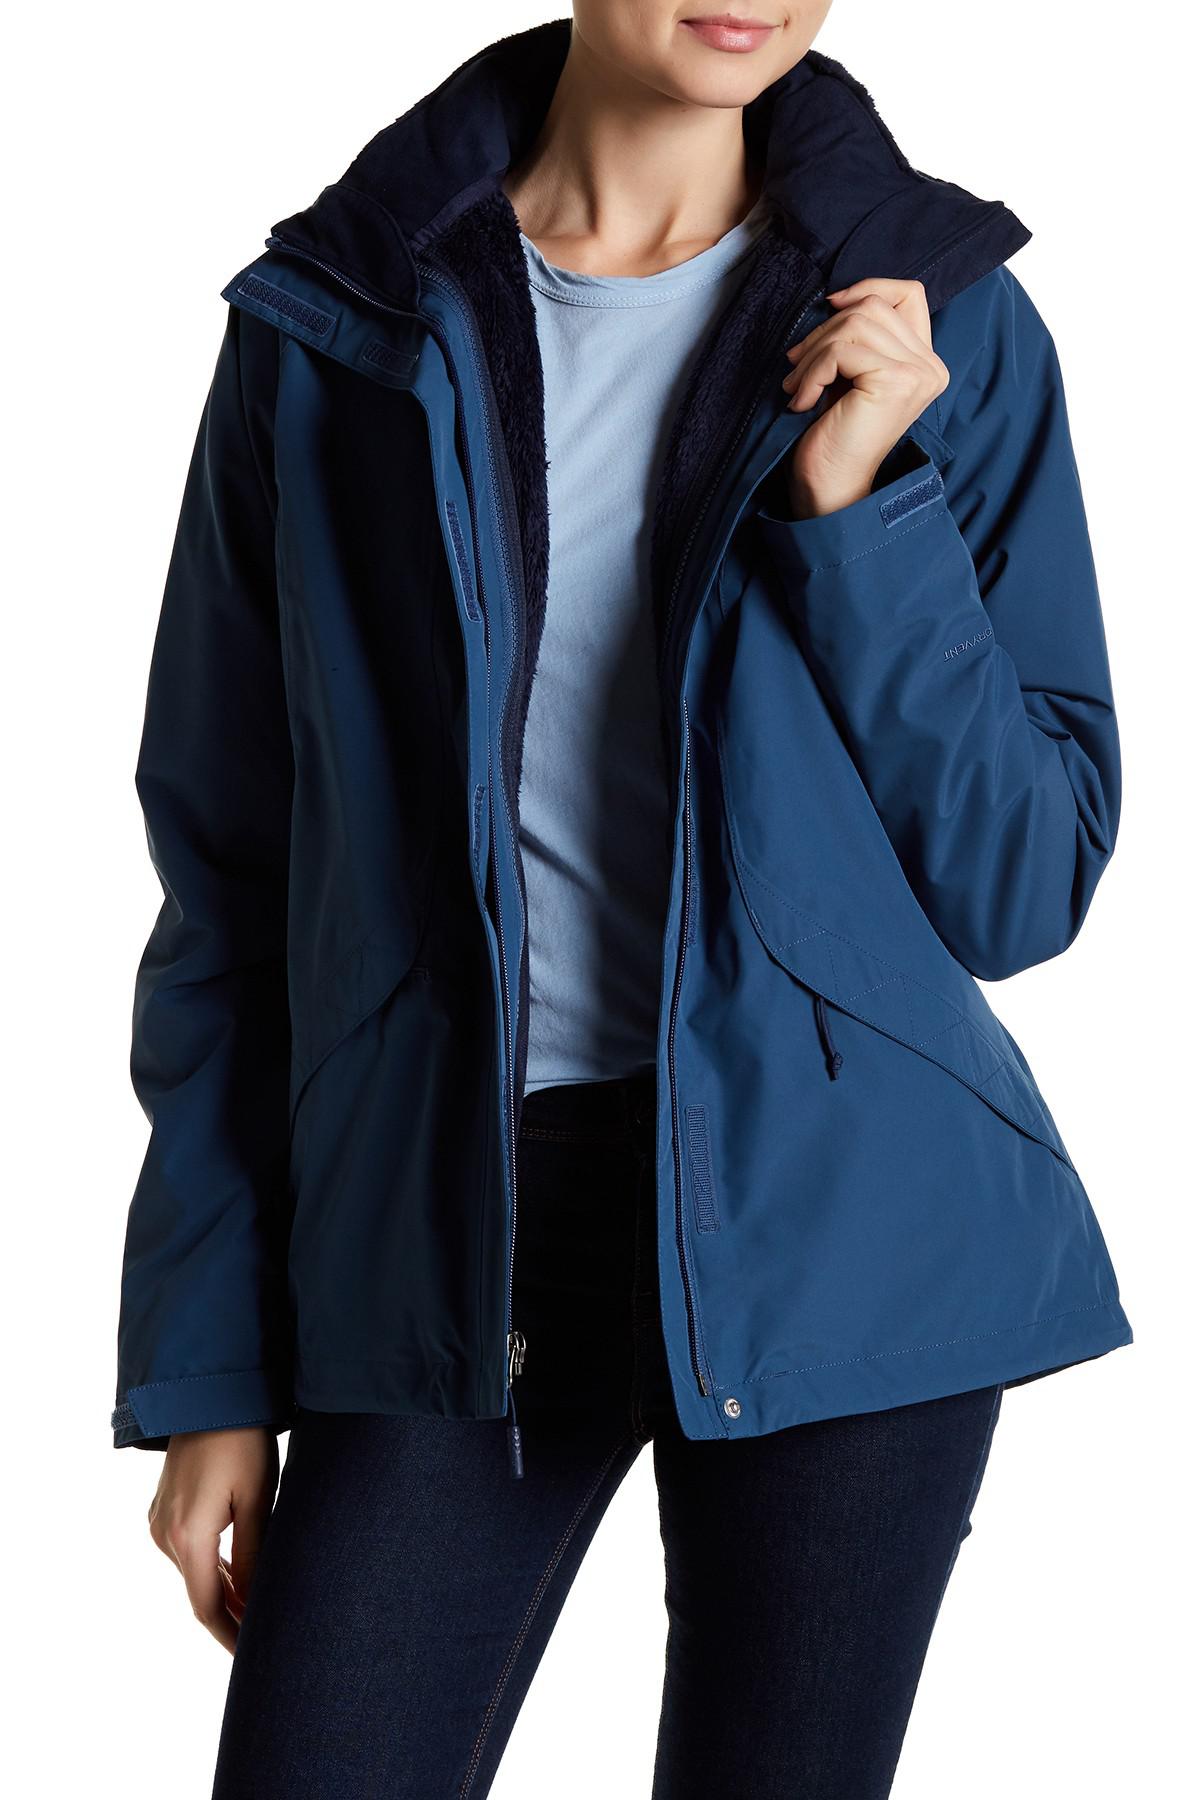 Lyst - The North Face Faux Fur Lined Boundary Triclimate Jacket in Blue